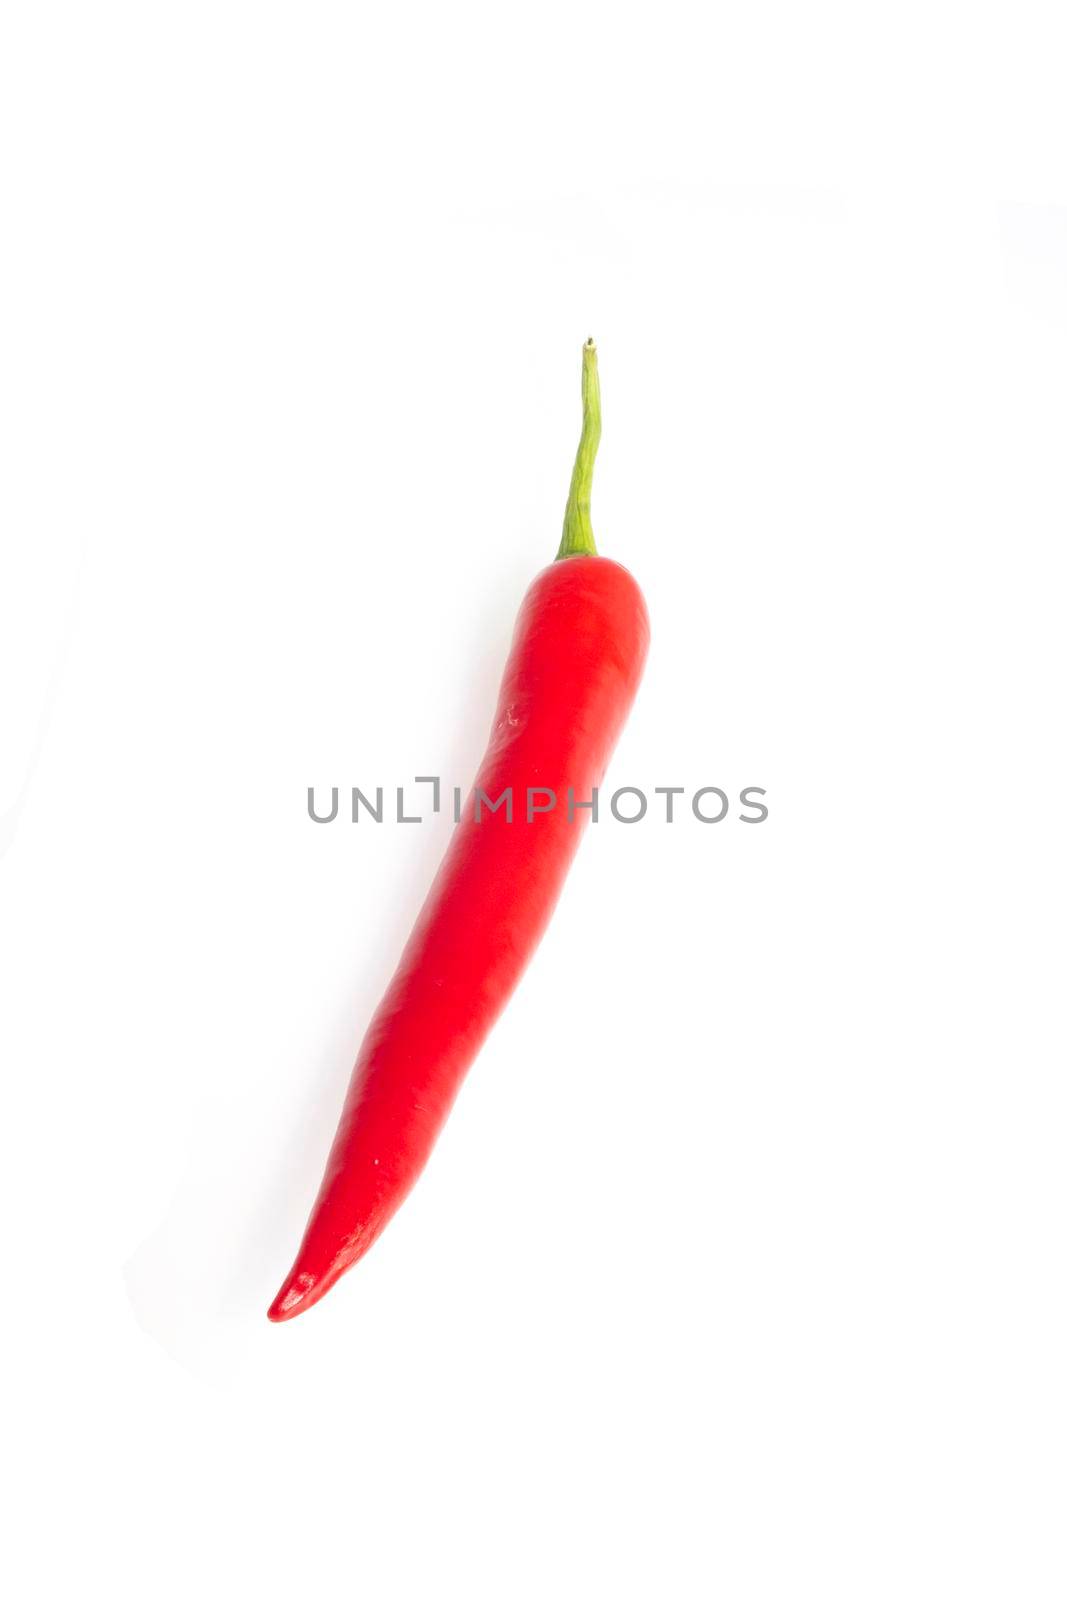 Red hot natural chili pepper.